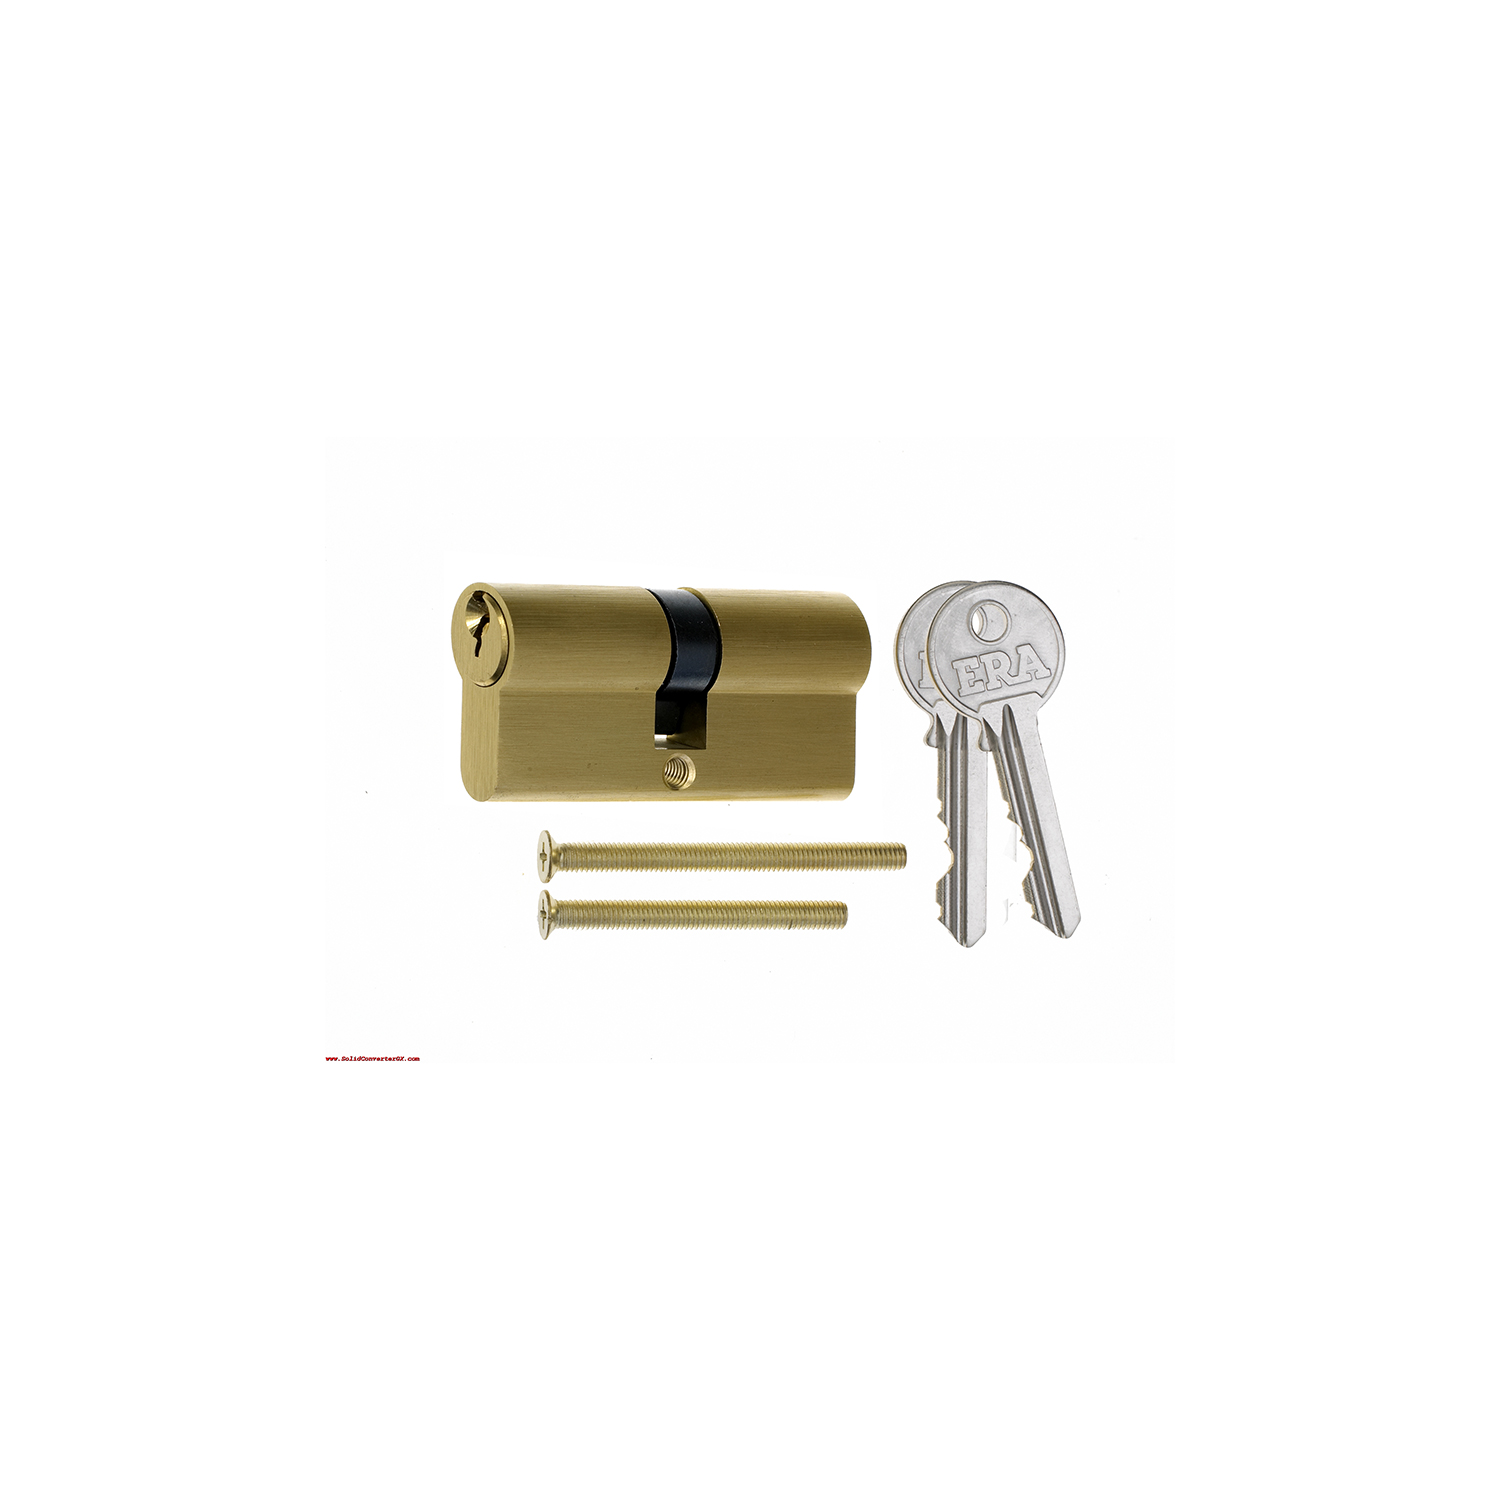 VARIOUS SIZES EURO-CYLINDER BRASS DOOR LOCK 6 PIN ANTI-DRILL KEYED DIFFERENT